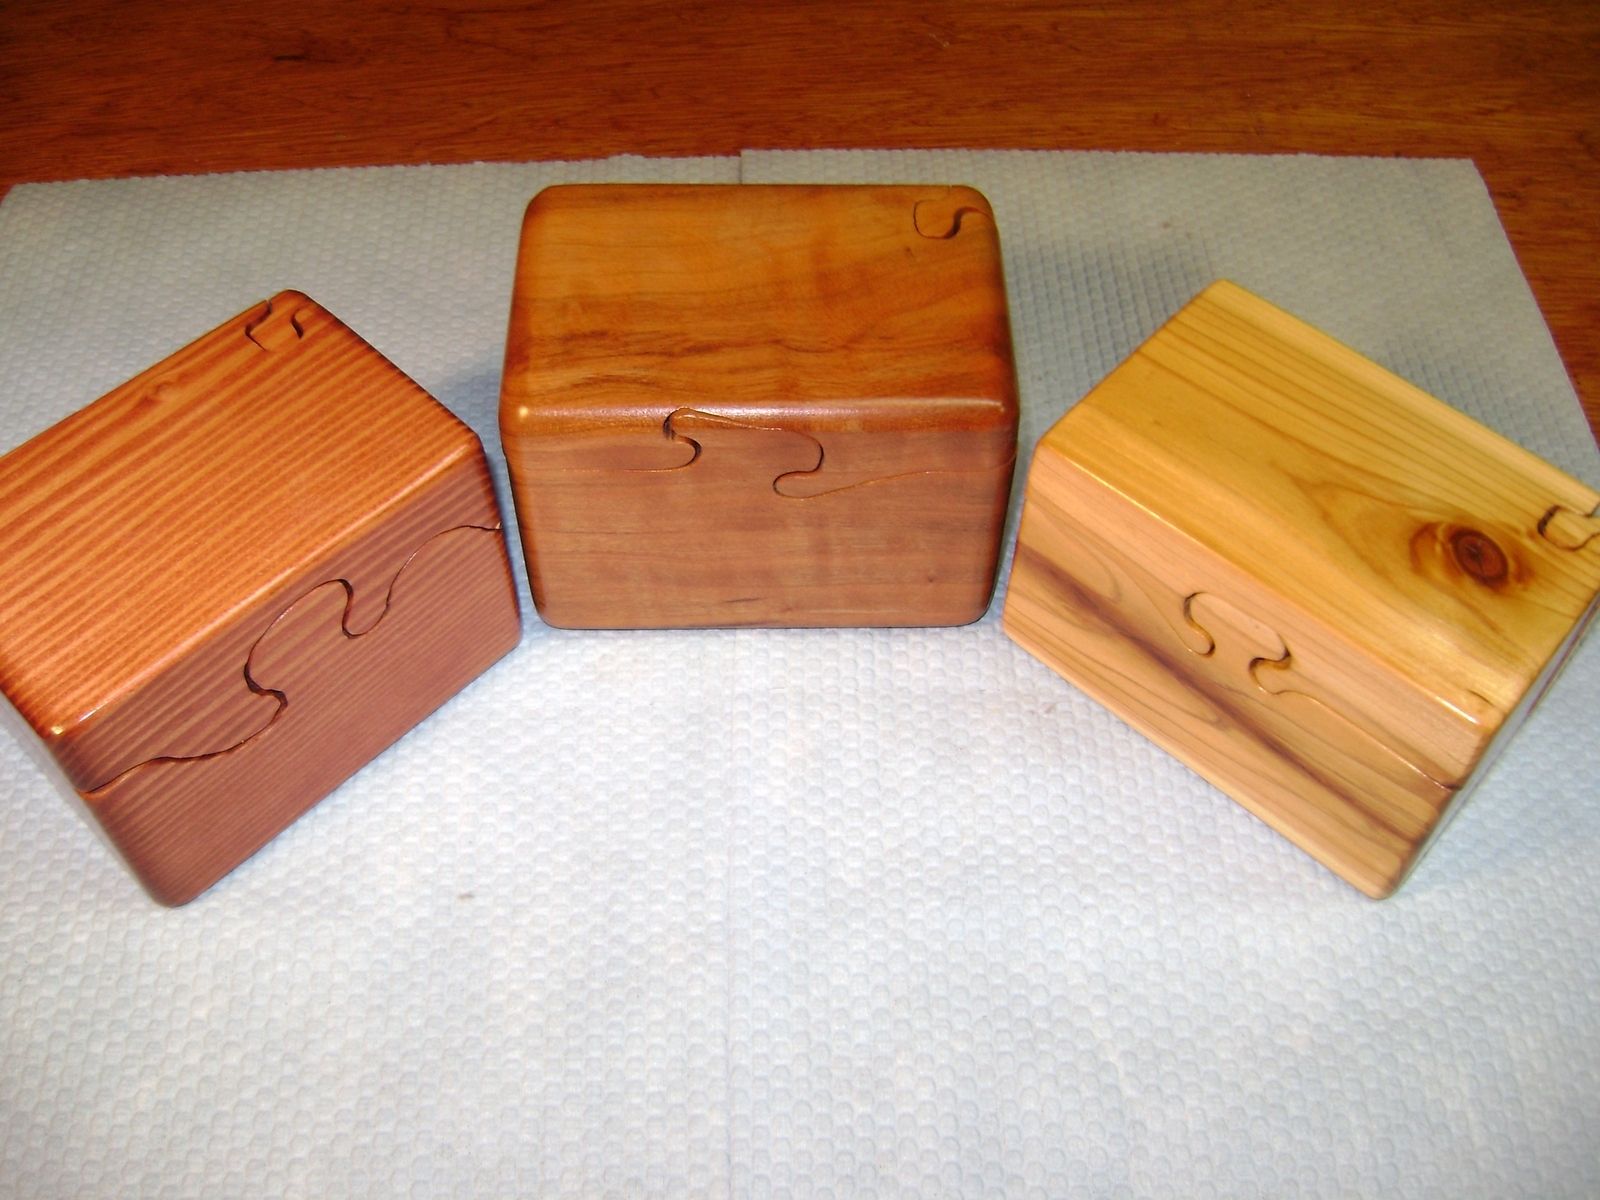 Hand Crafted Puzzle Boxes by JM Wood CustomMade.com